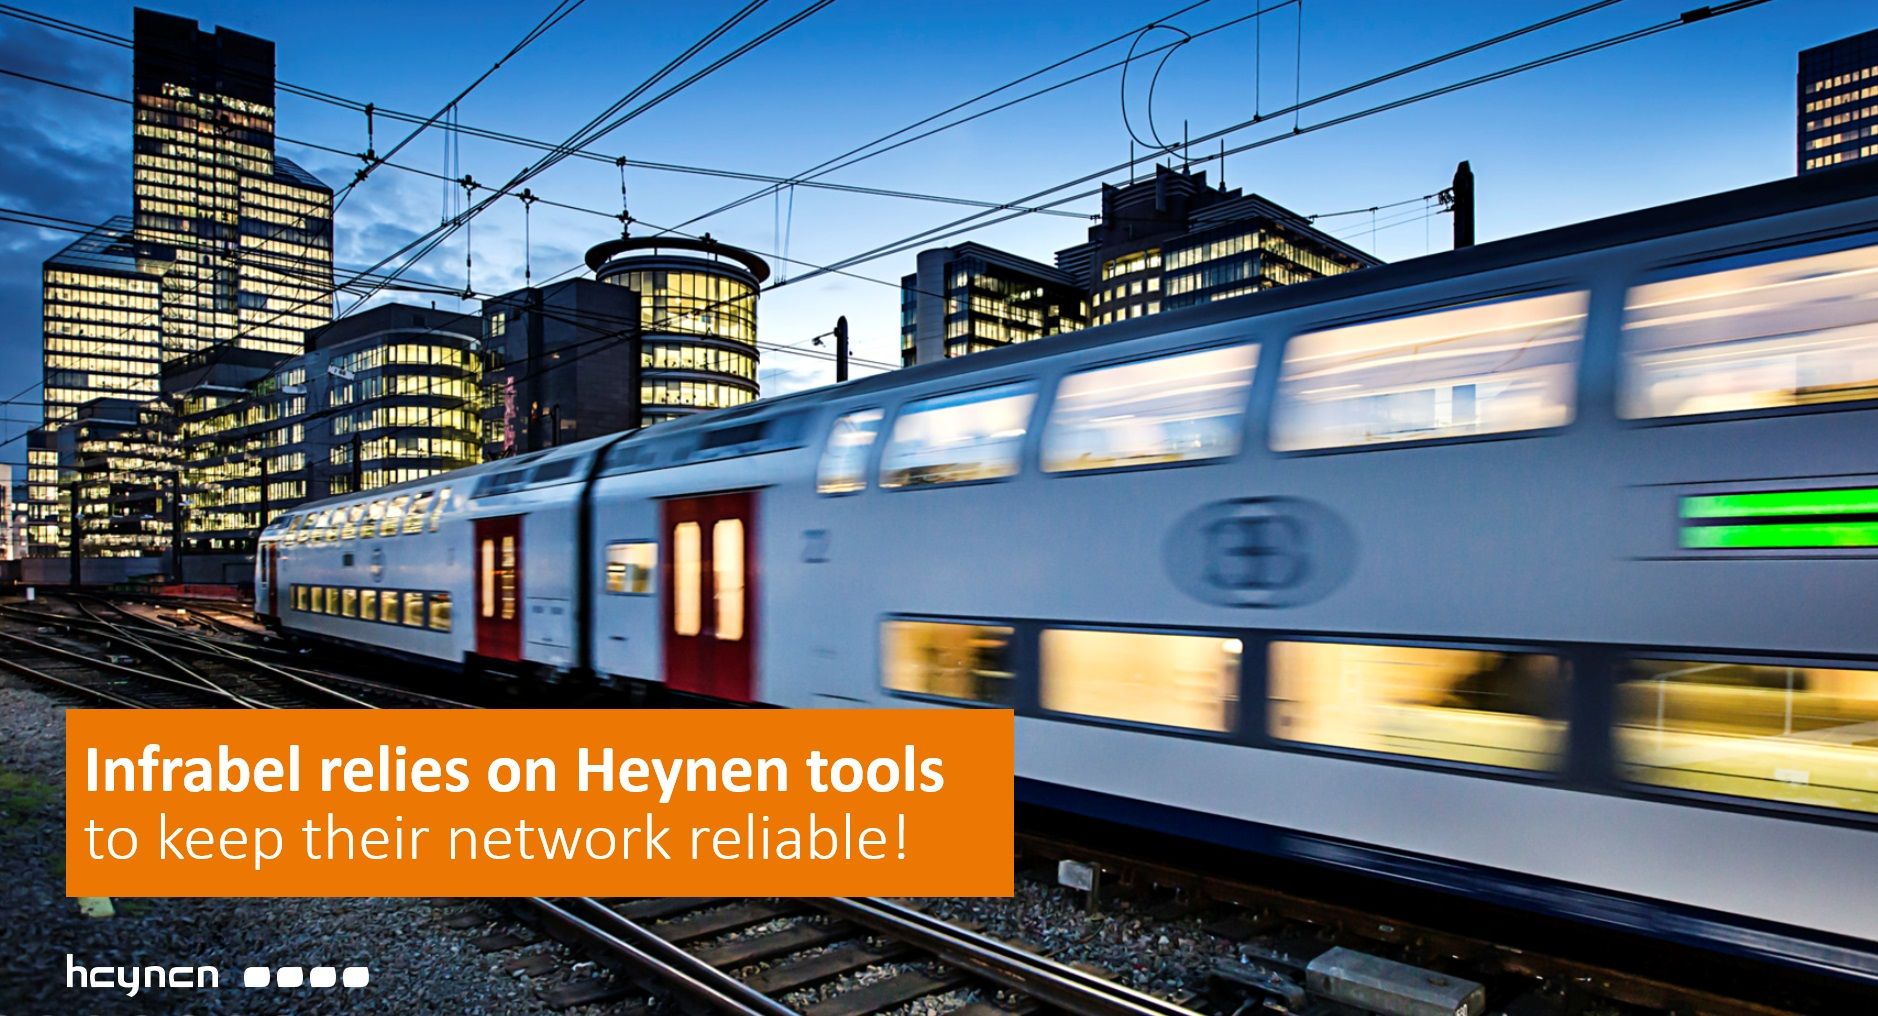 Infrabel relies on Heynen tools to keep their network reliable!